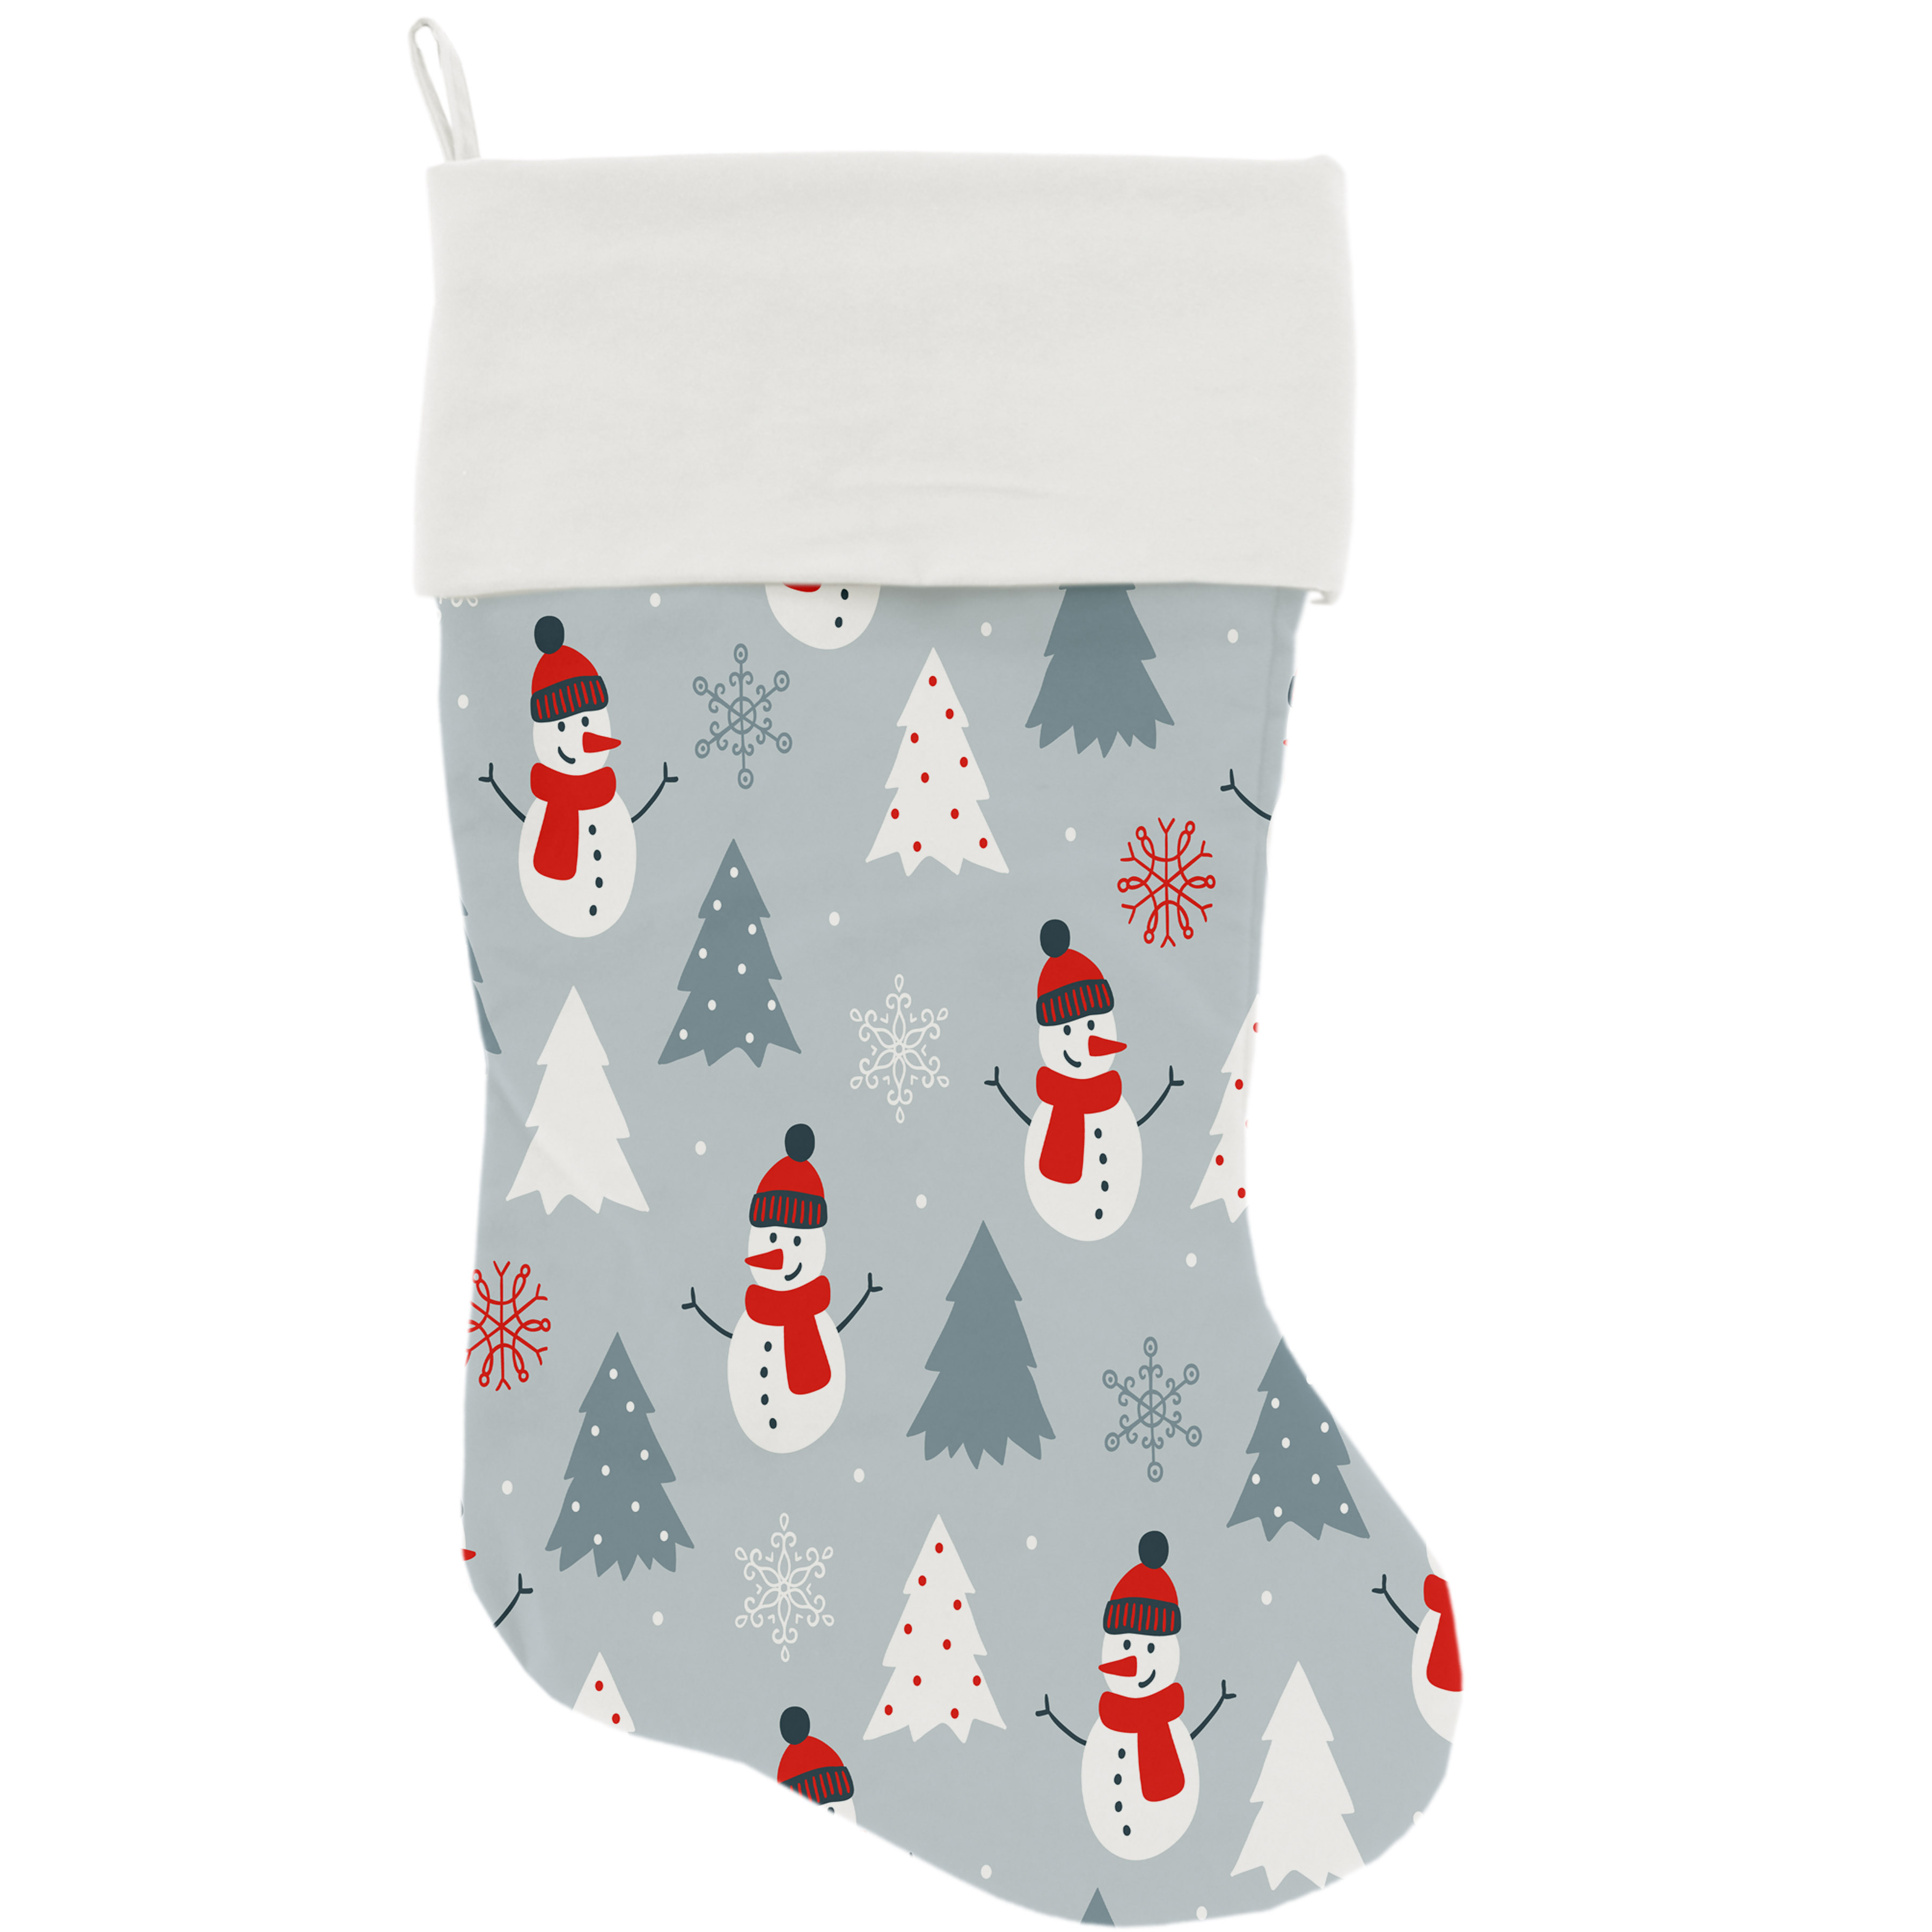 Look at Frosty Go Christmas Stocking